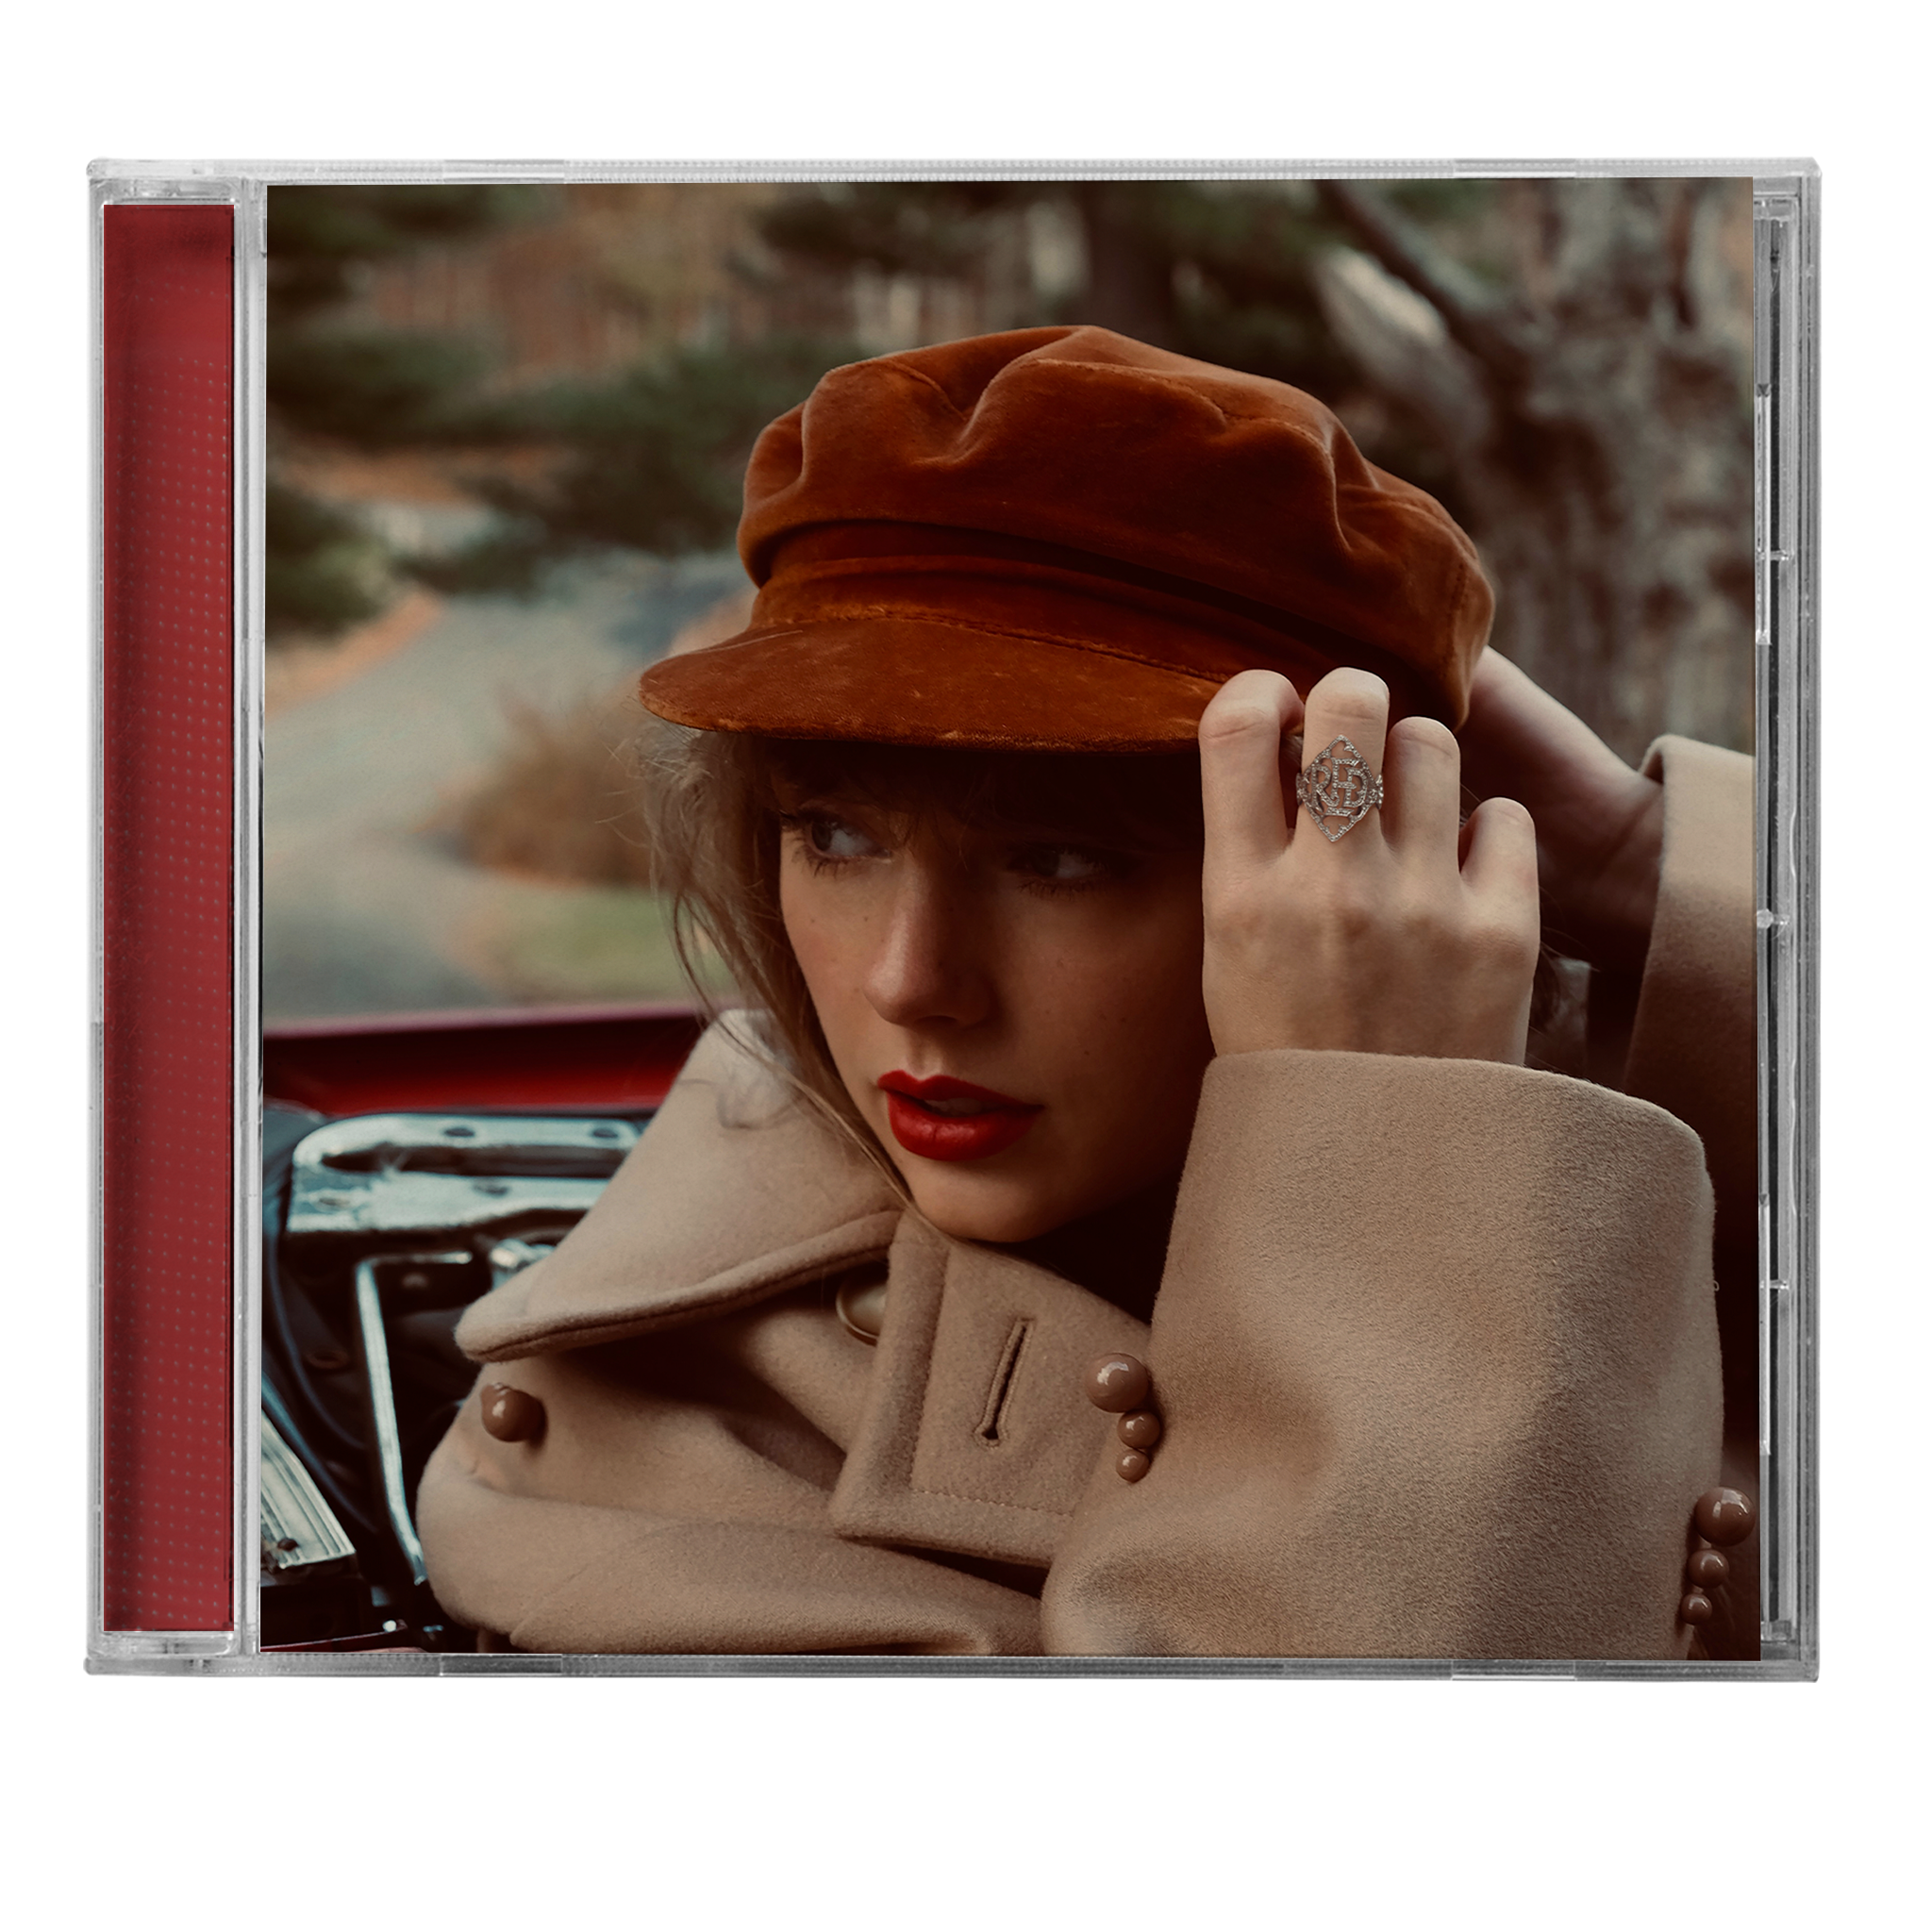 RED (Taylor's Version) CD each CD album features: 30 songs, including 9 songs from the Vault, exclusive album booklet with never before seen photos, artwork and lyrics for the 9 songs from the Vault